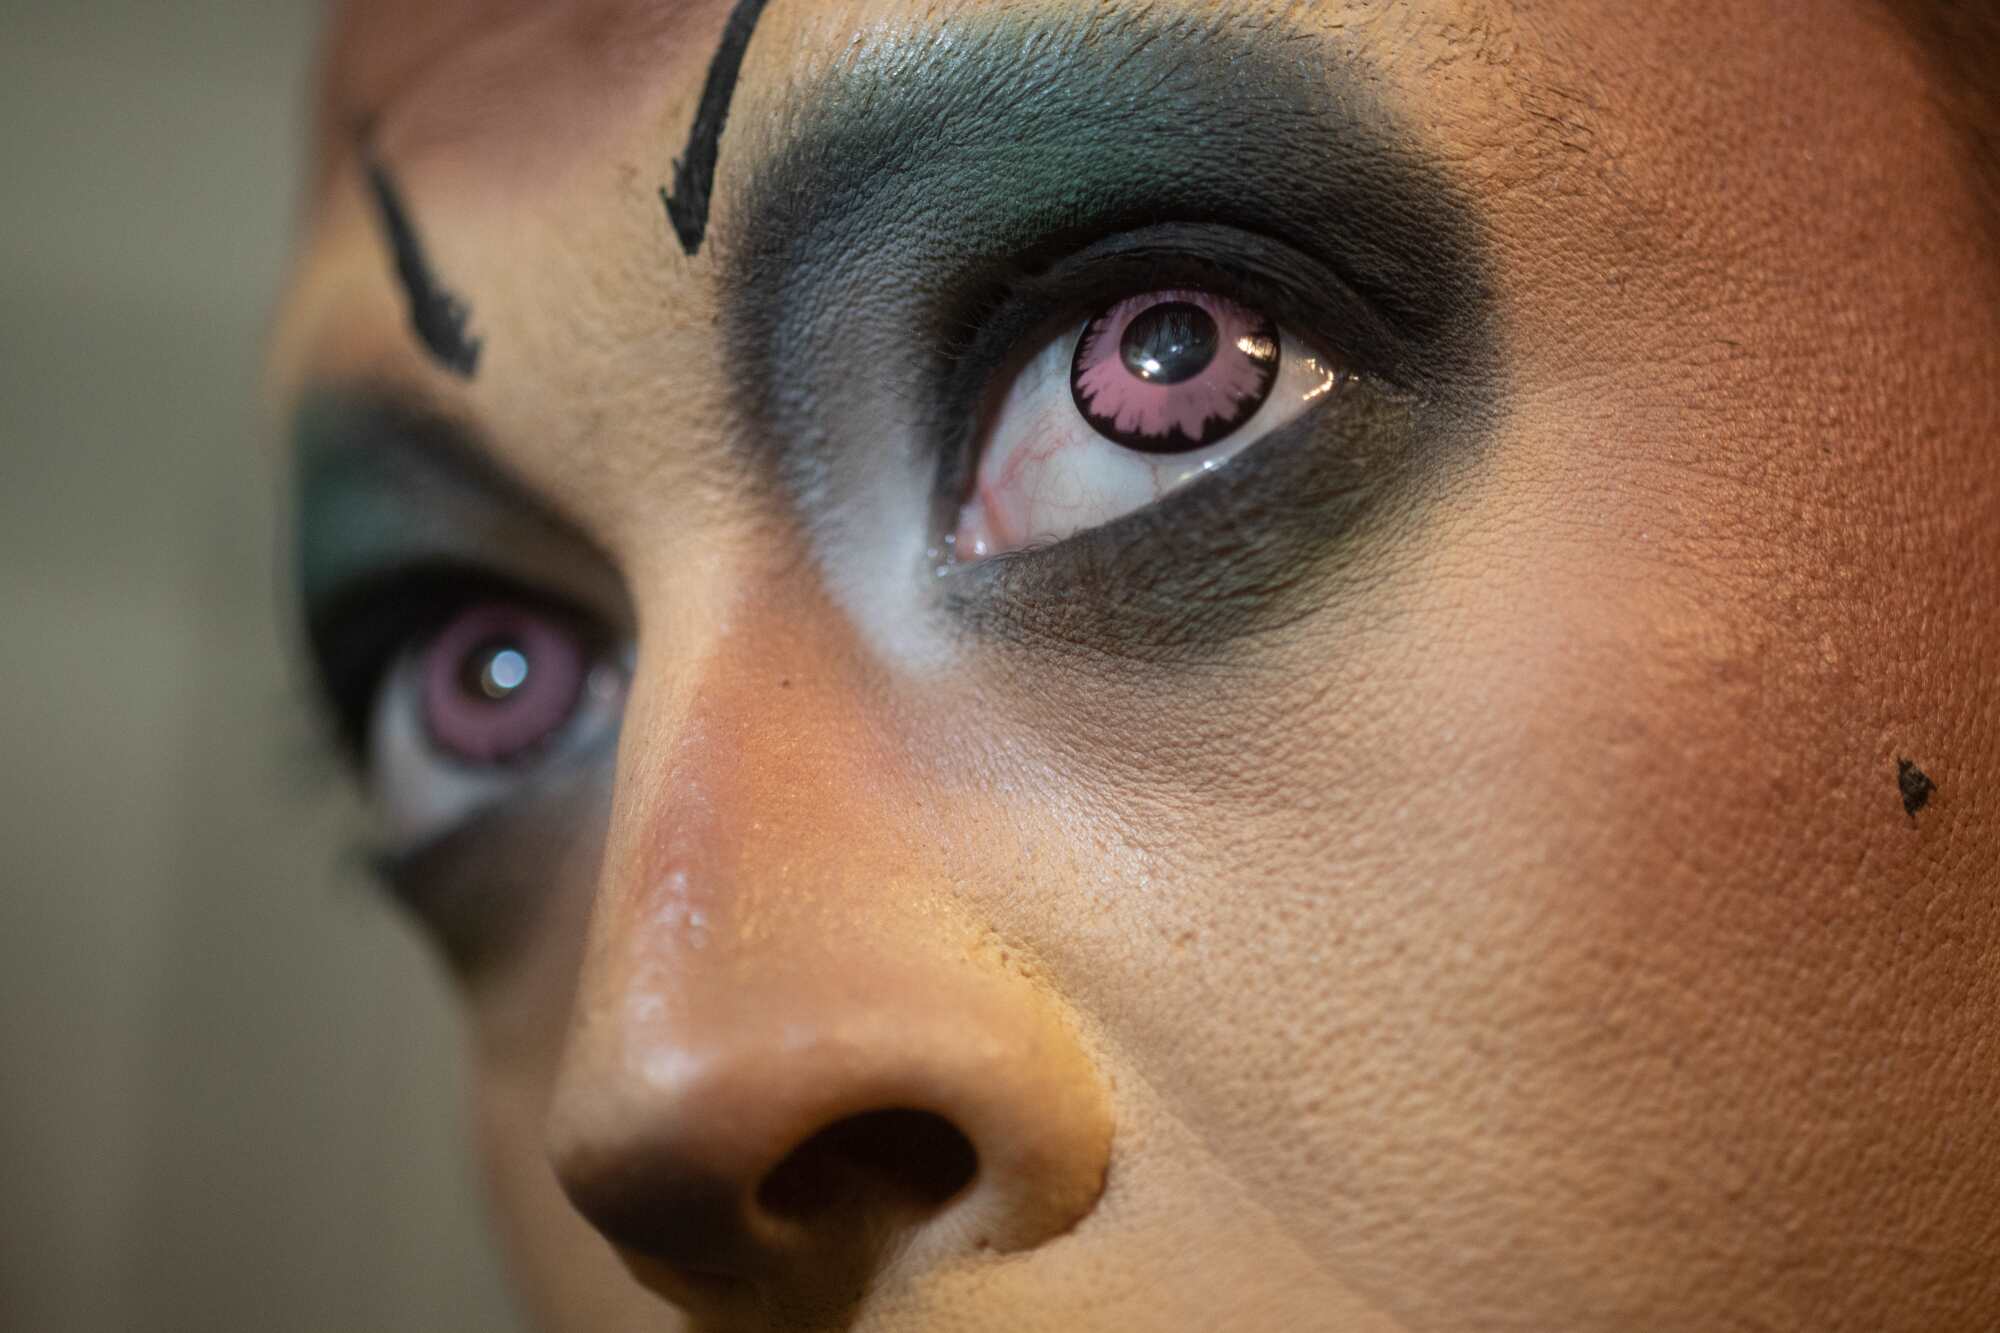 A close up of a man's face, wearing dramatic brown-colored contact lenses and makeup.